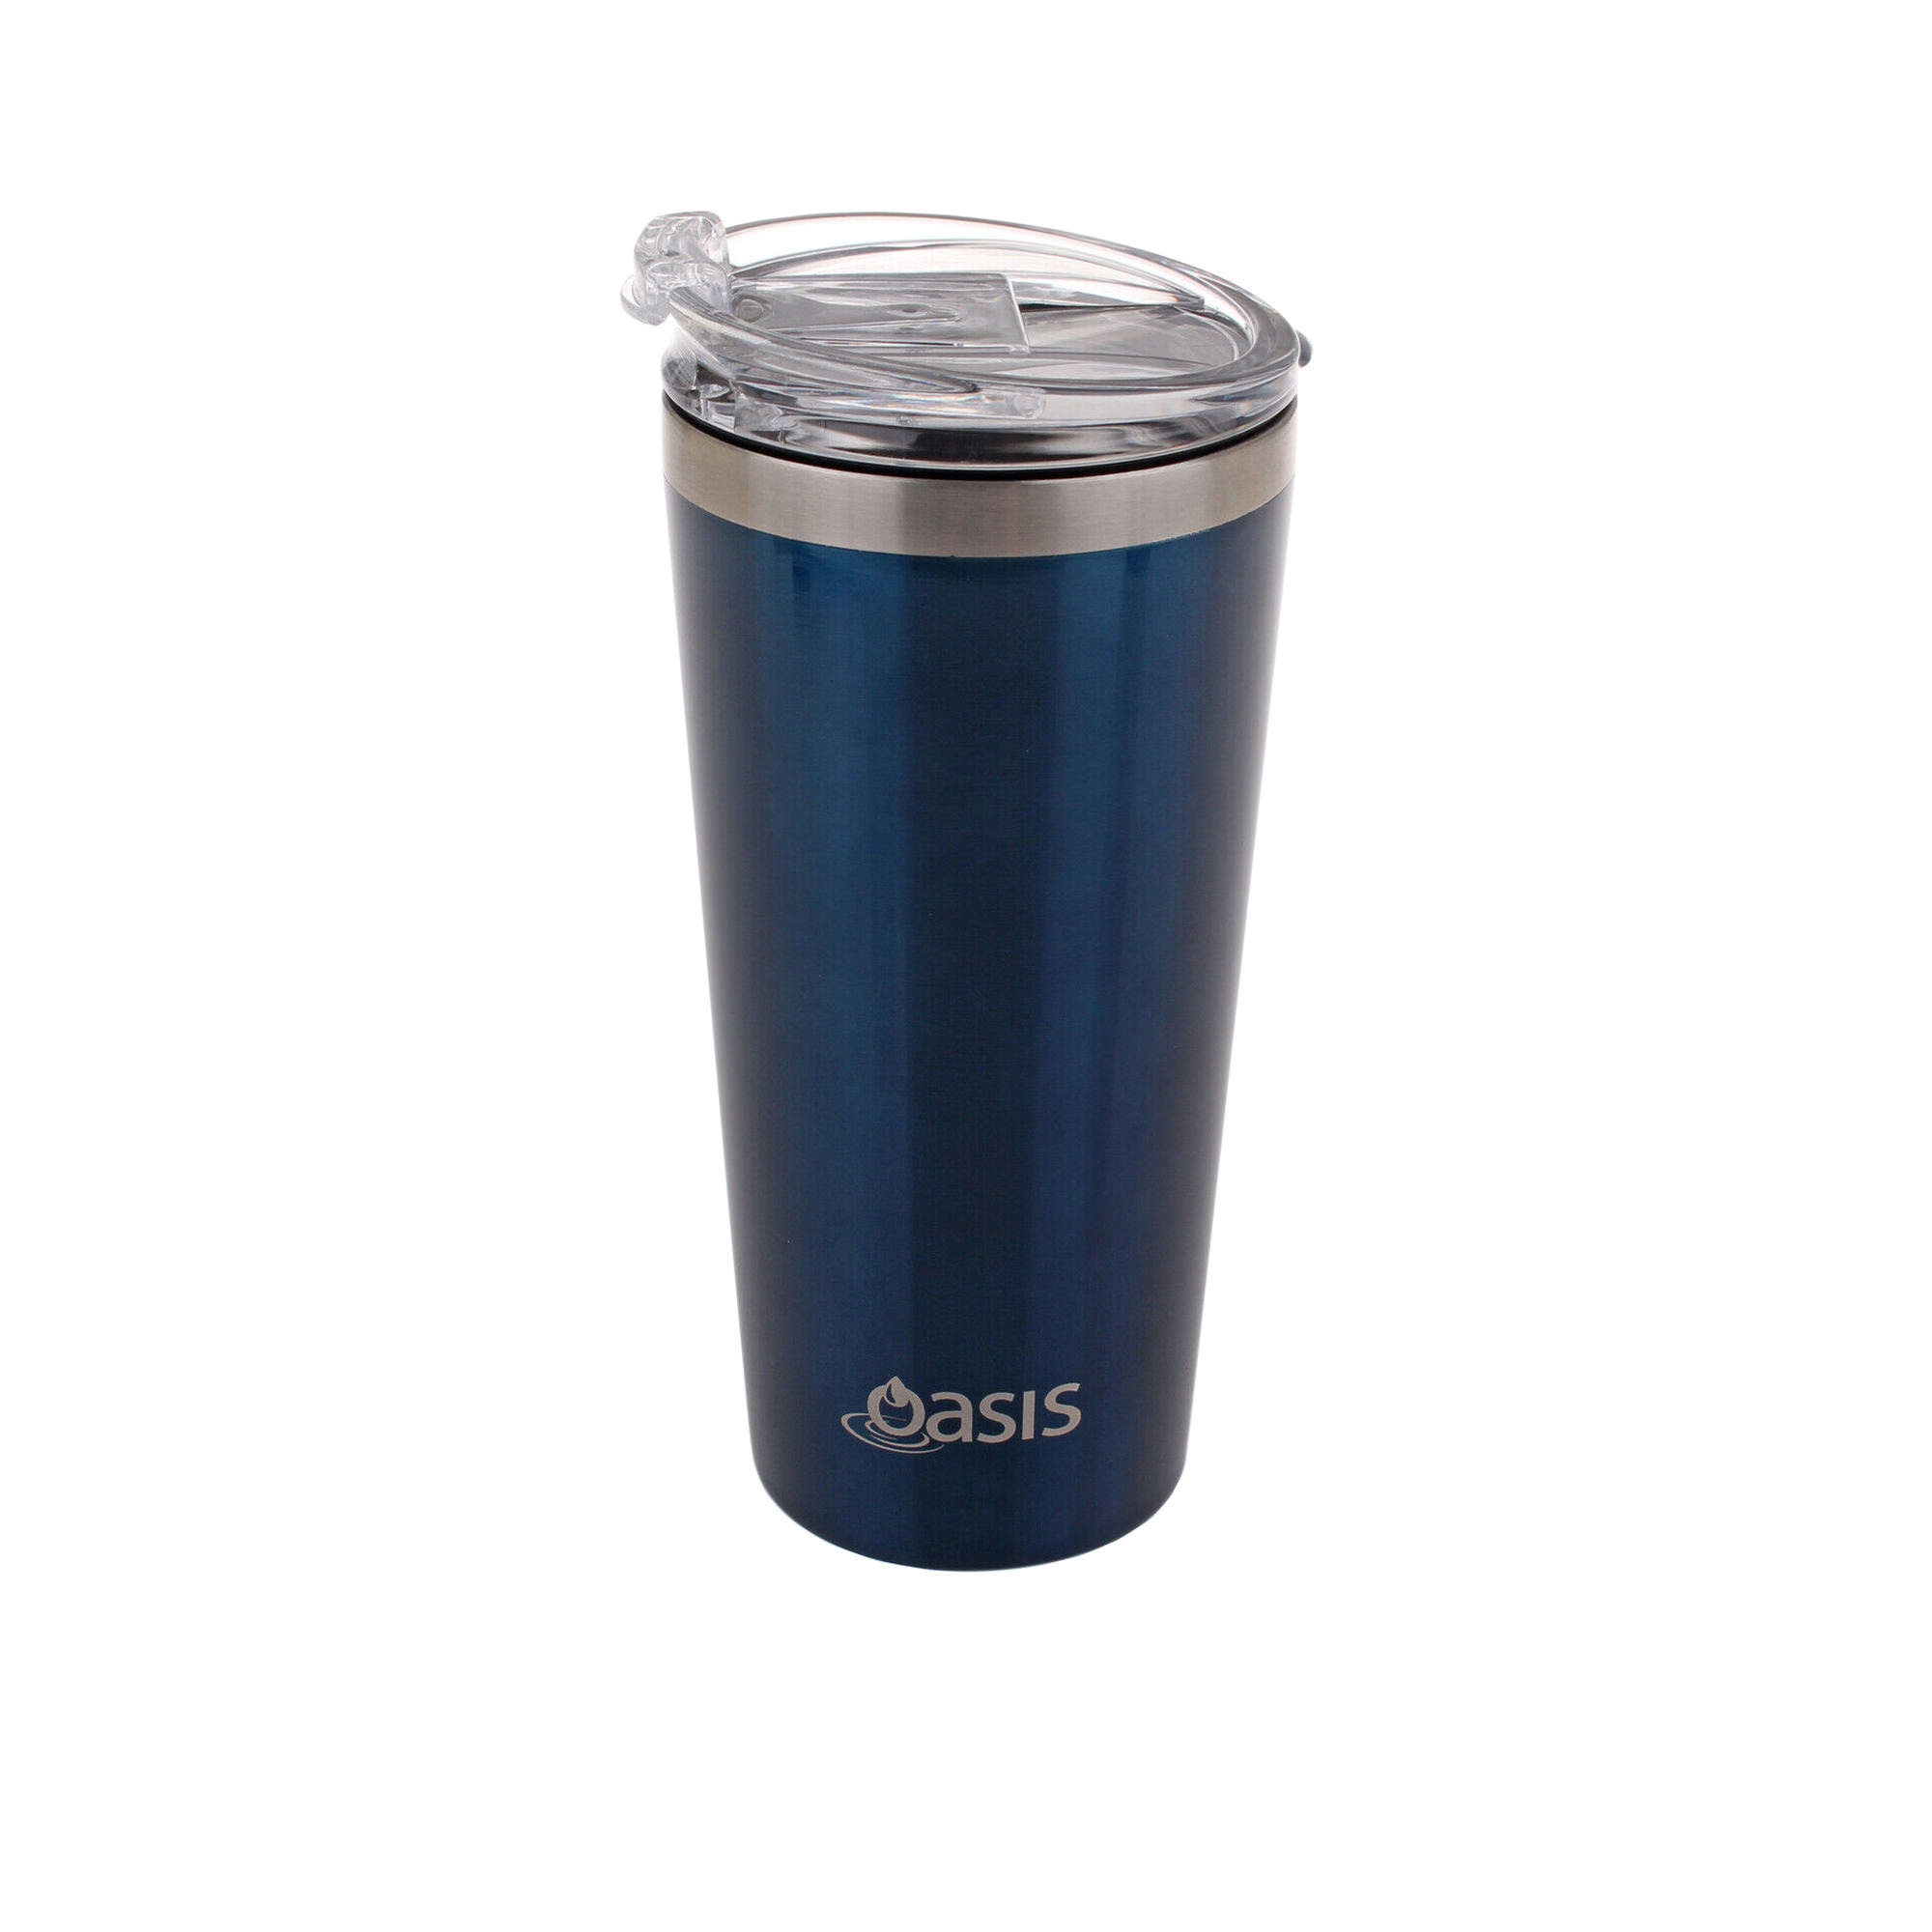 Oasis Double Wall Insulated Travel Mug with Lid 480ml Navy Image 1